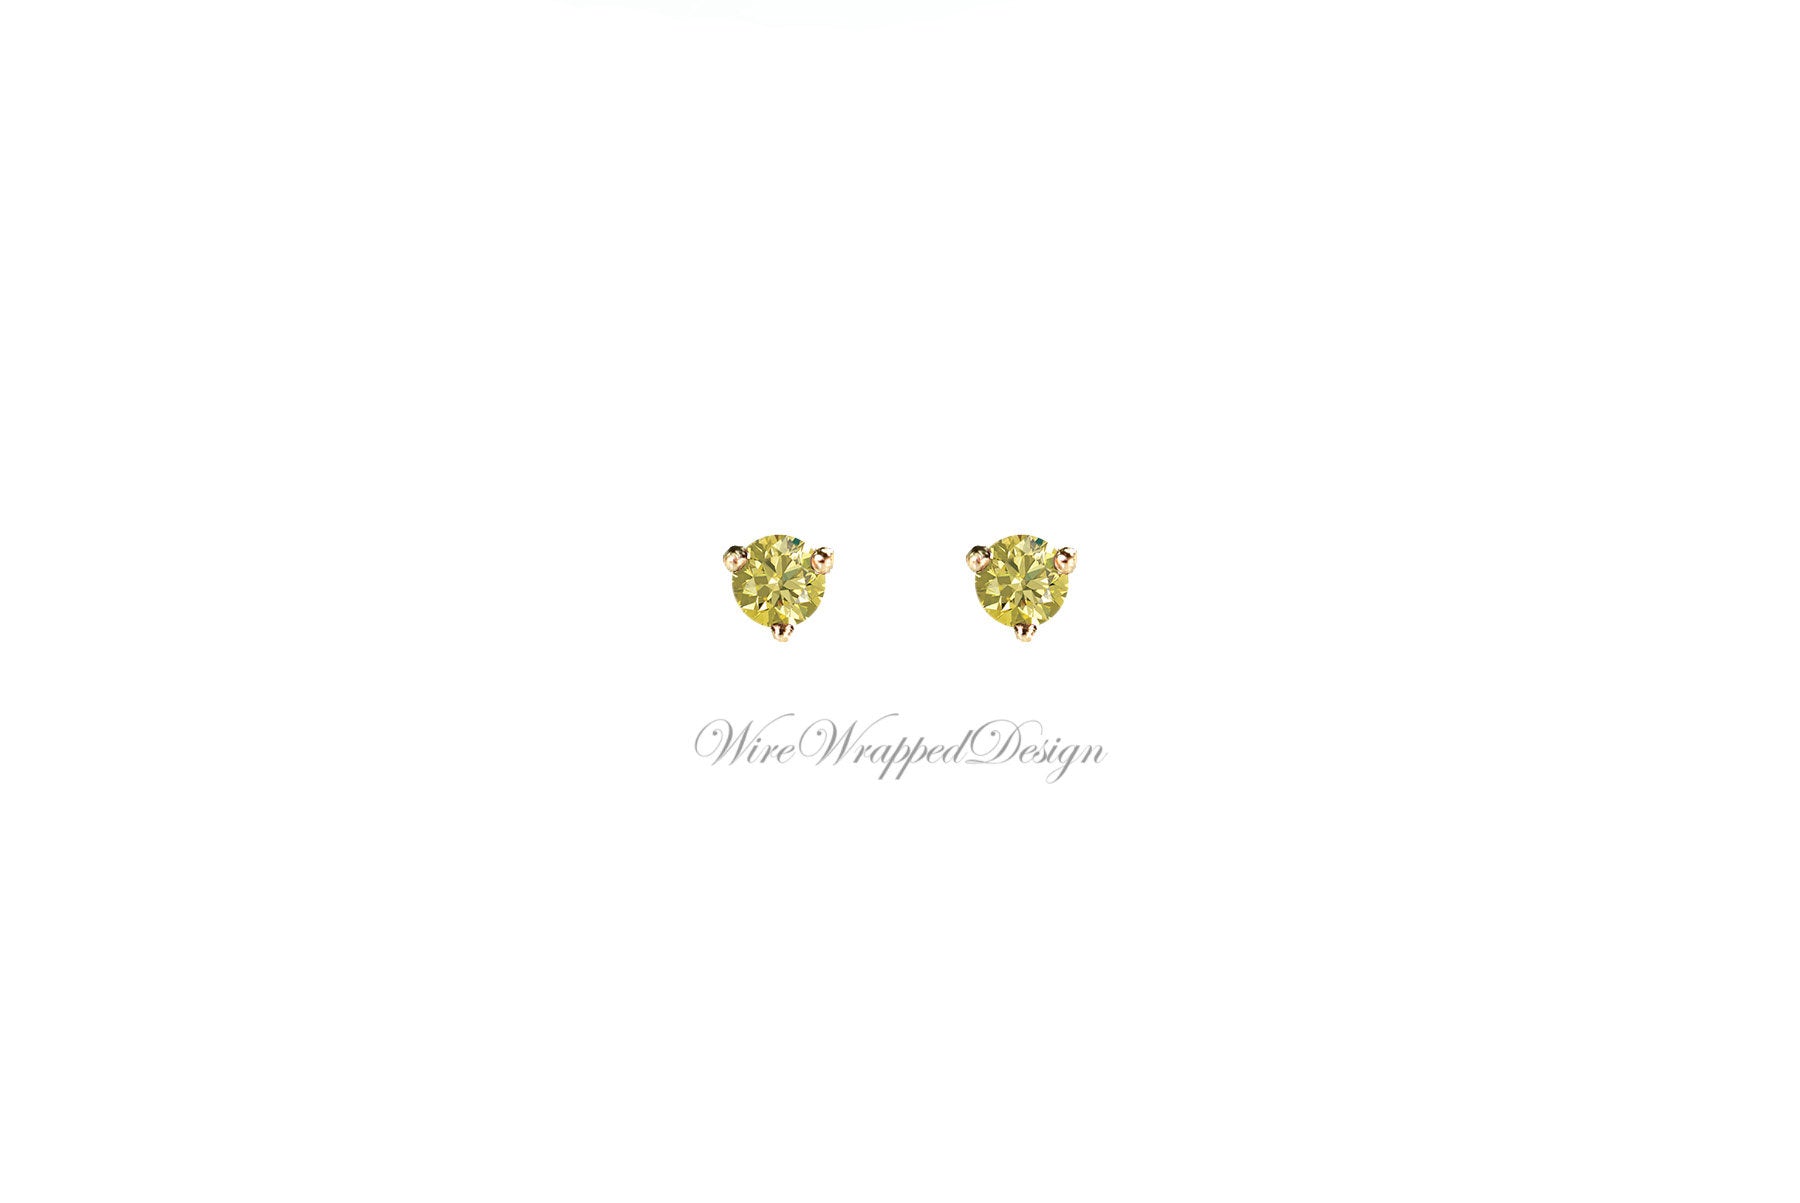 PAIR Genuine CANARY Yellow DIAMOND Earrings Studs 2.5mm 0.12tcw Martini 14k Solid Gold Yellow/Rose/White Platinum Silver Cartilage Helix